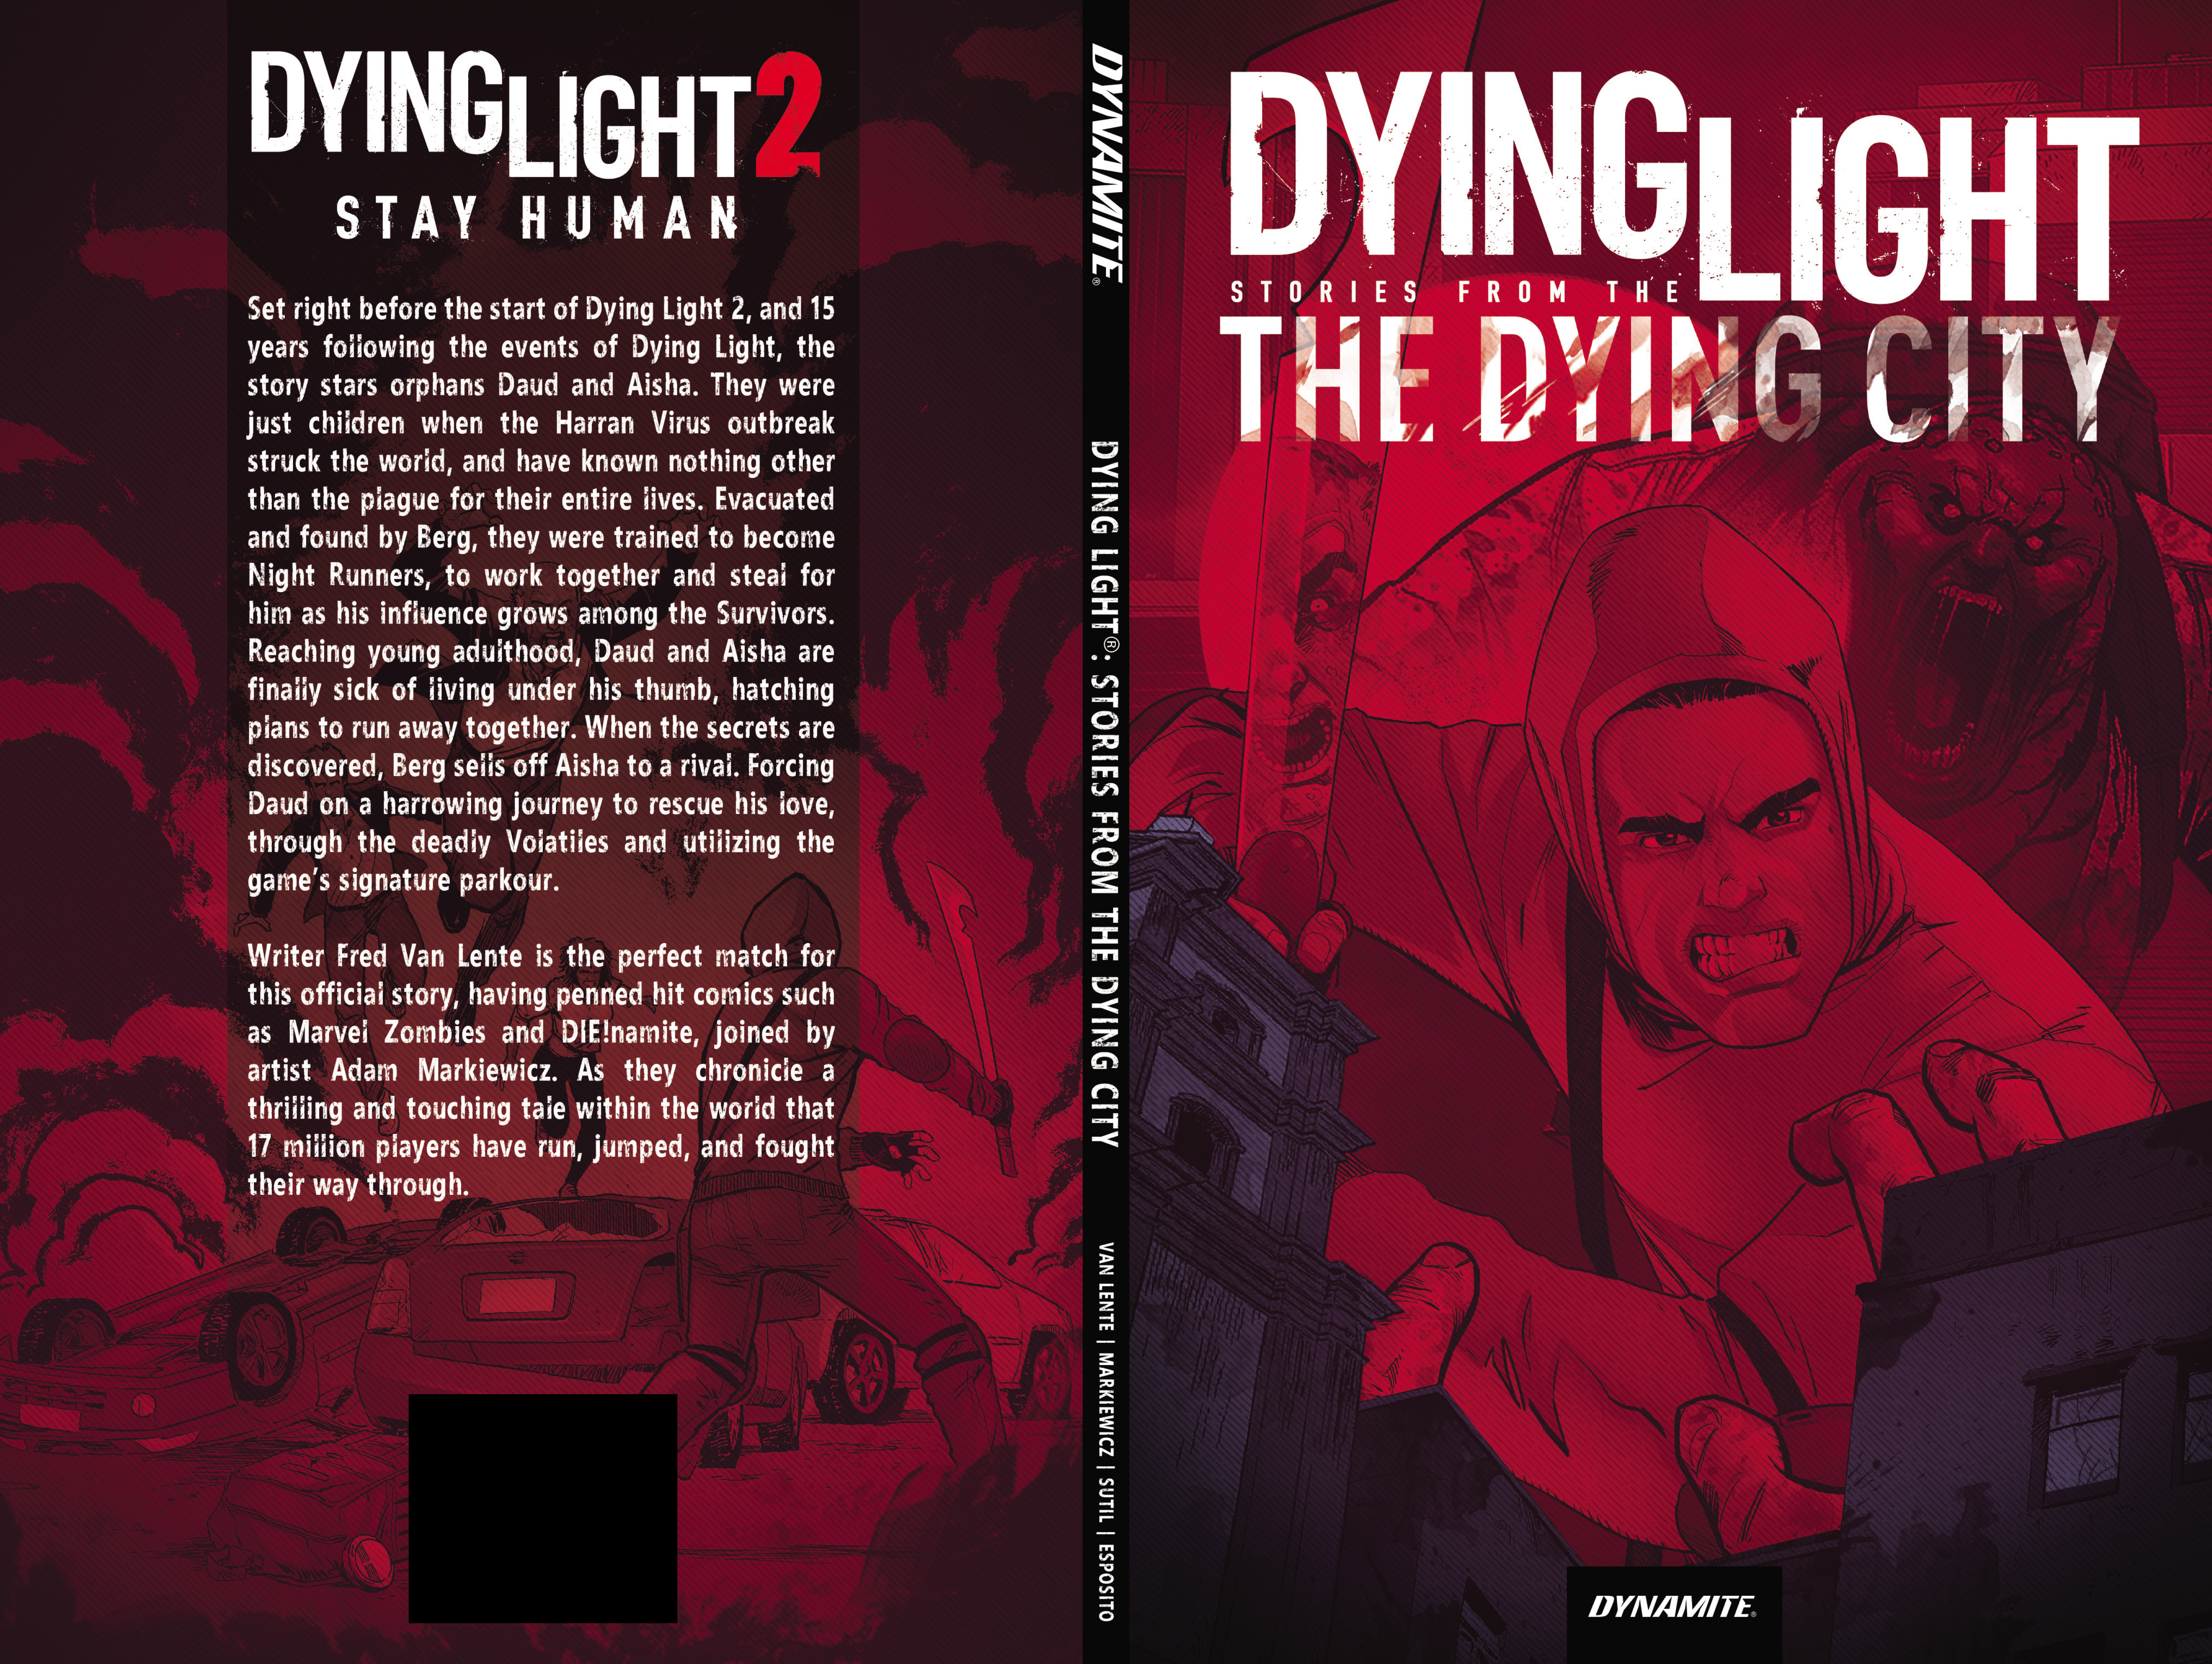 Read online Dying Light: Stories From the Dying City comic -  Issue # TPB (Part 1) - 1